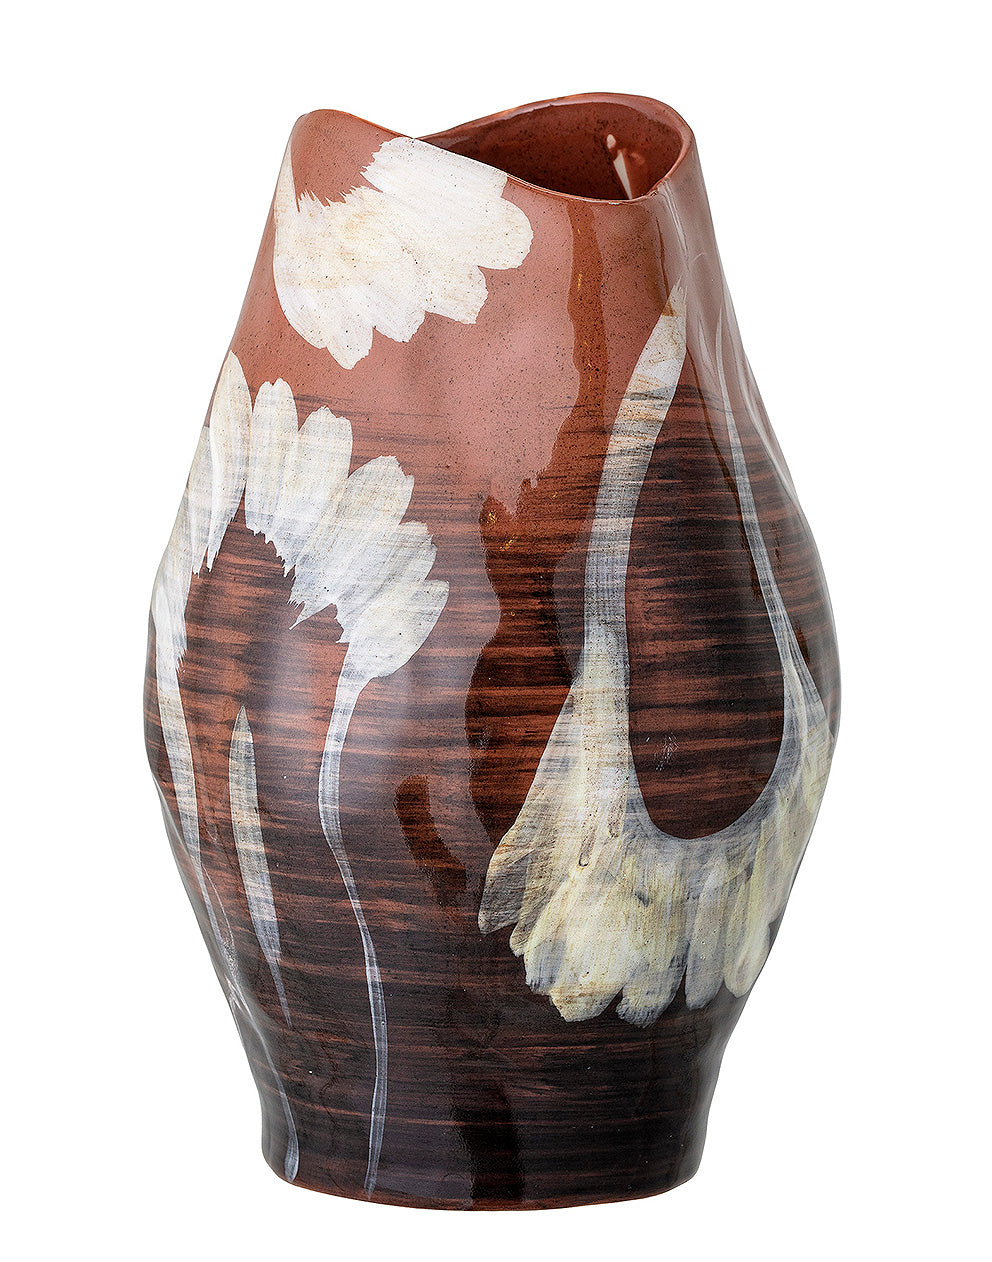 Large Stoneware Vase in Terracotta with Floral Print